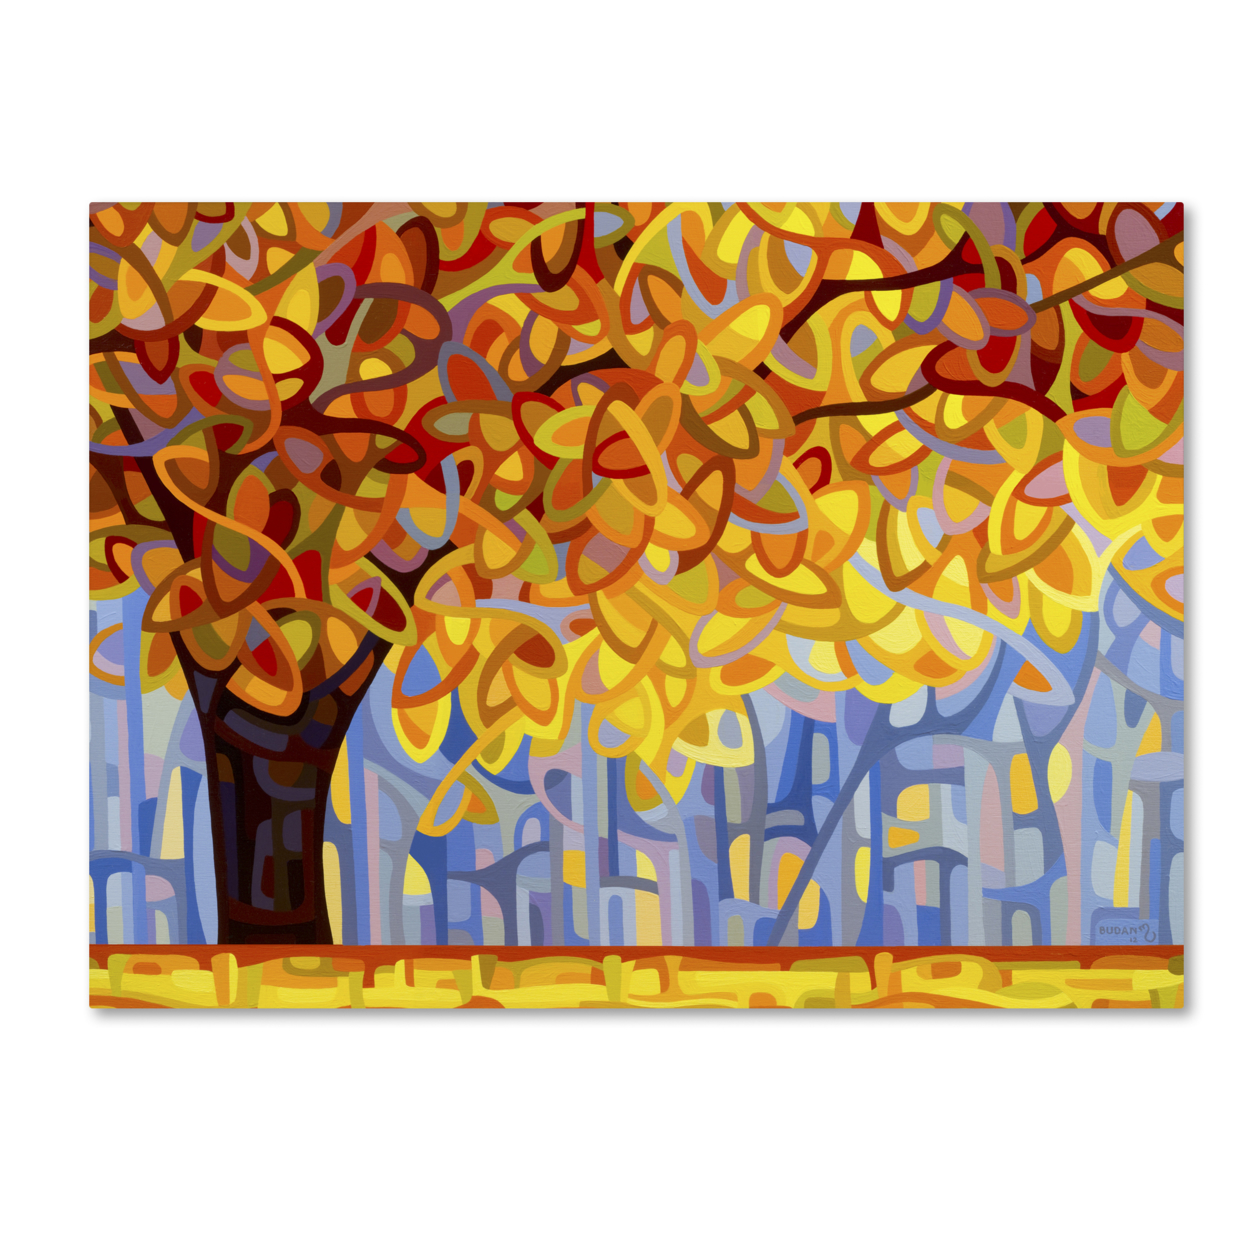 Mandy Budan 'October Gold' Canvas Wall Art 35 X 47 Inches